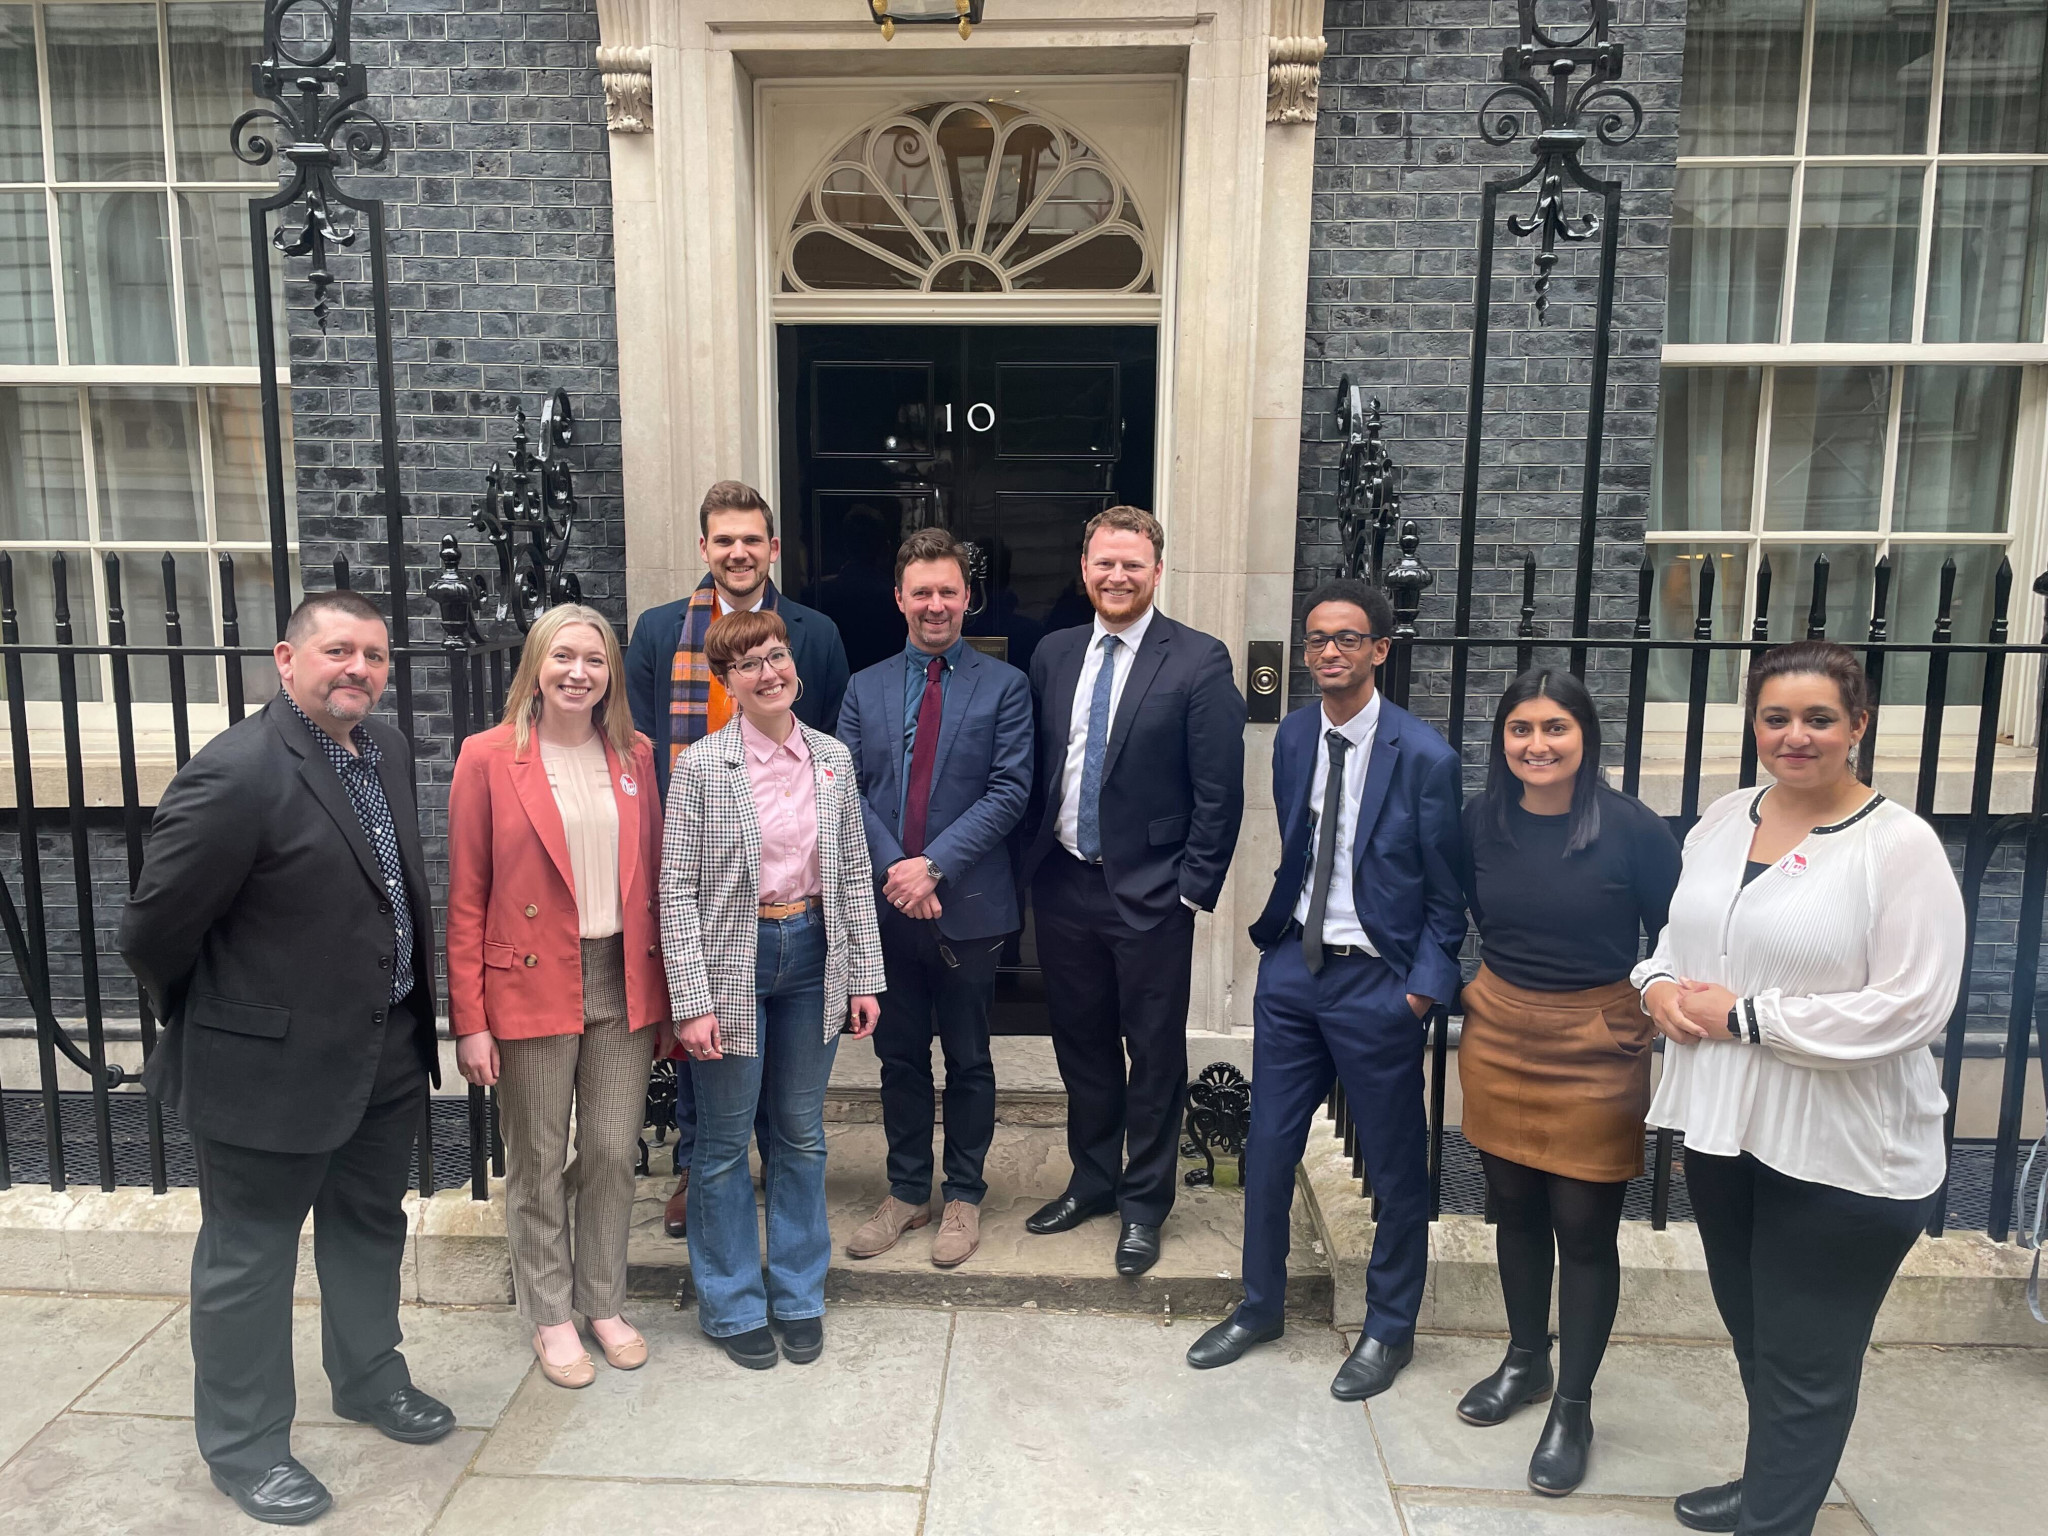  Leaders of UK video games industry celebrate success at Downing Street event